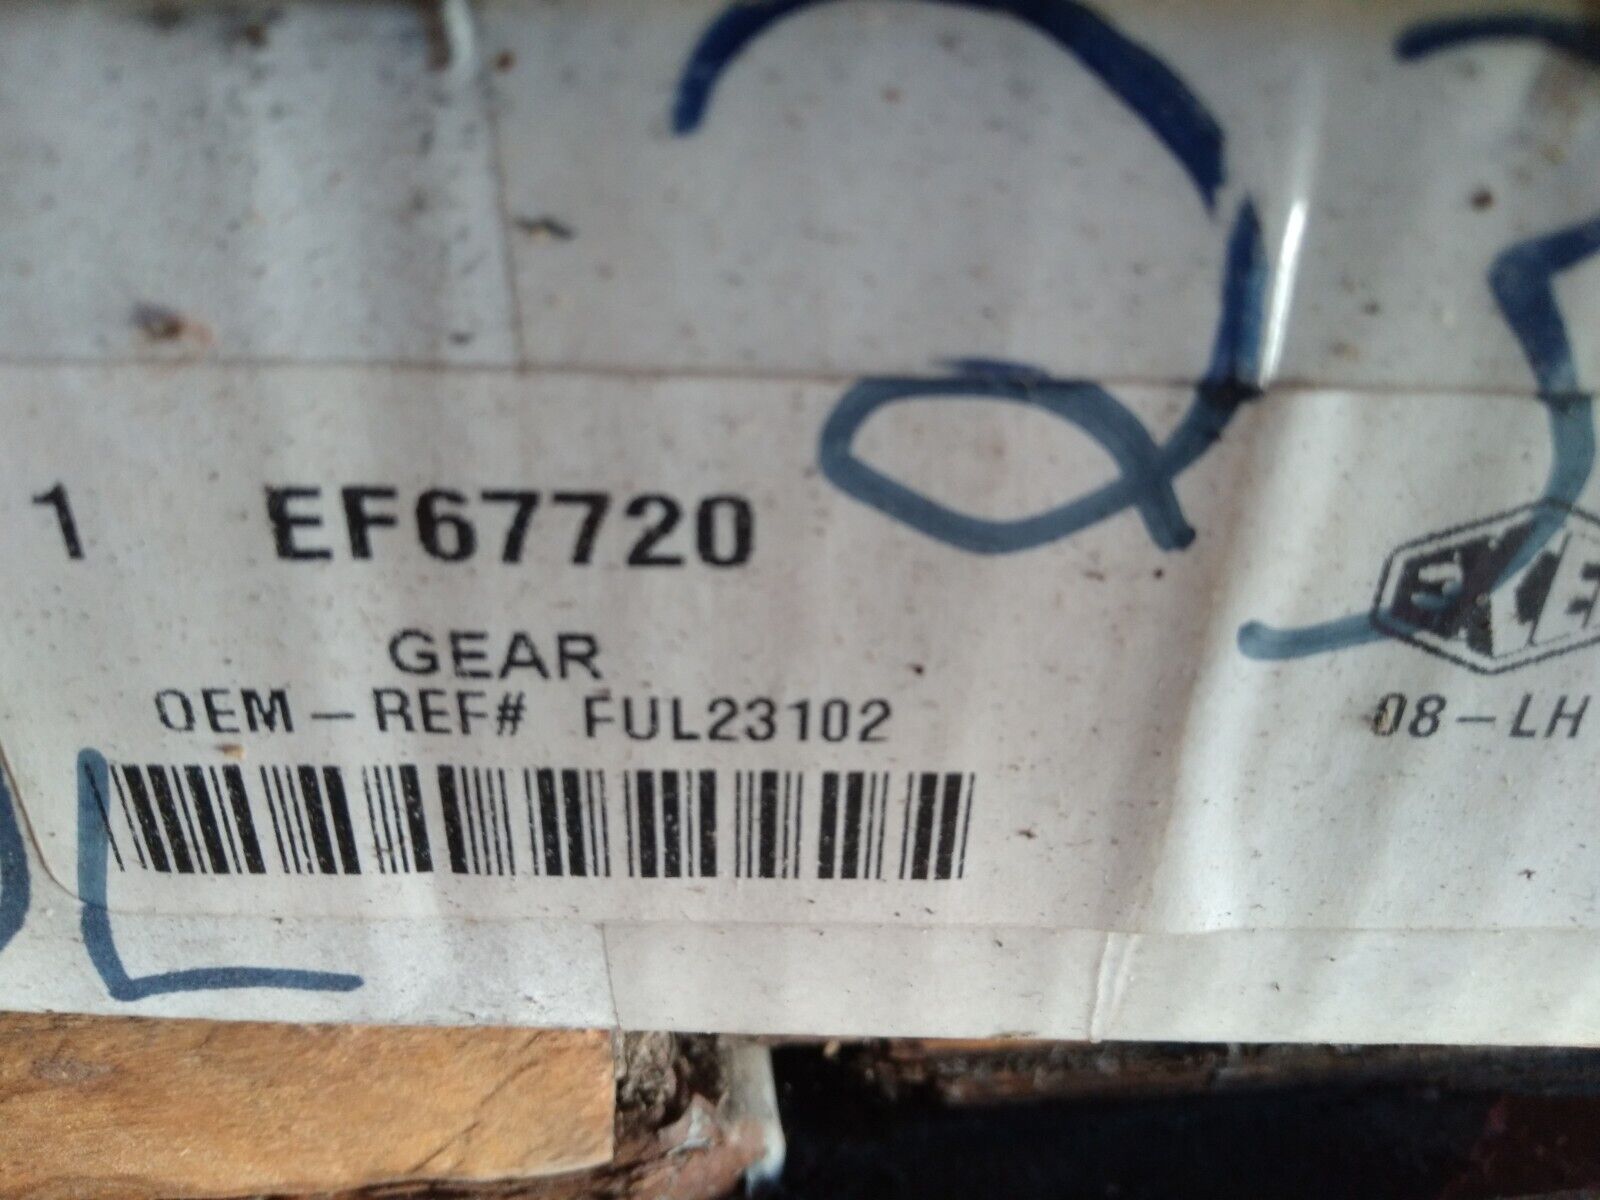 New PAI EF67720 Gear for Eaton Fuller RT 12709 Trans 23102